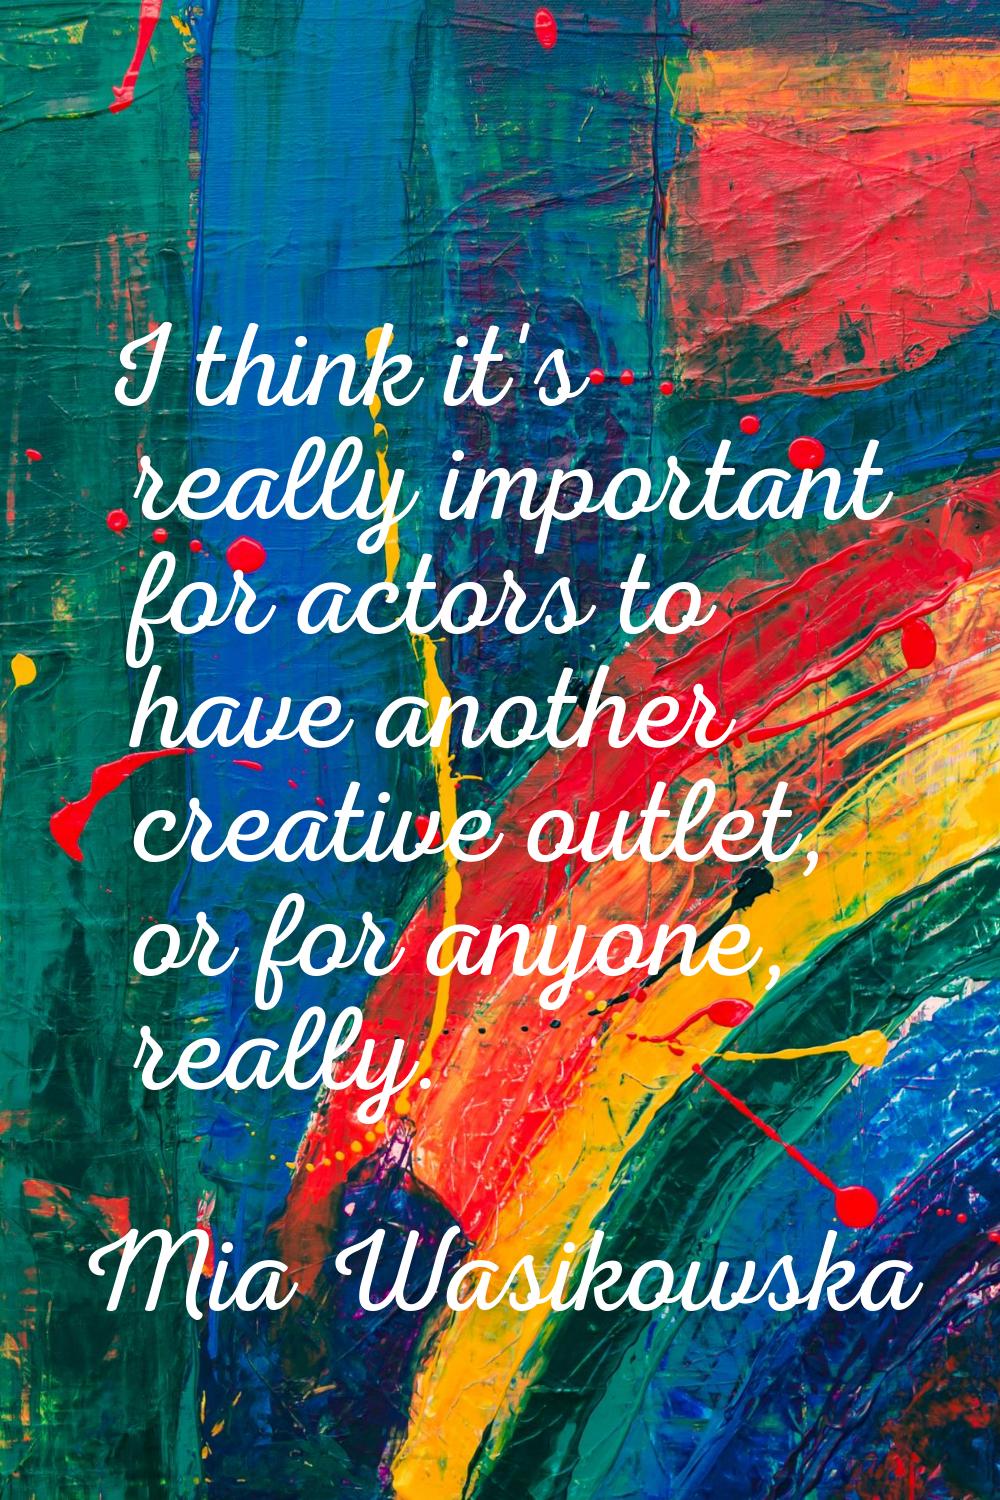 I think it's really important for actors to have another creative outlet, or for anyone, really.